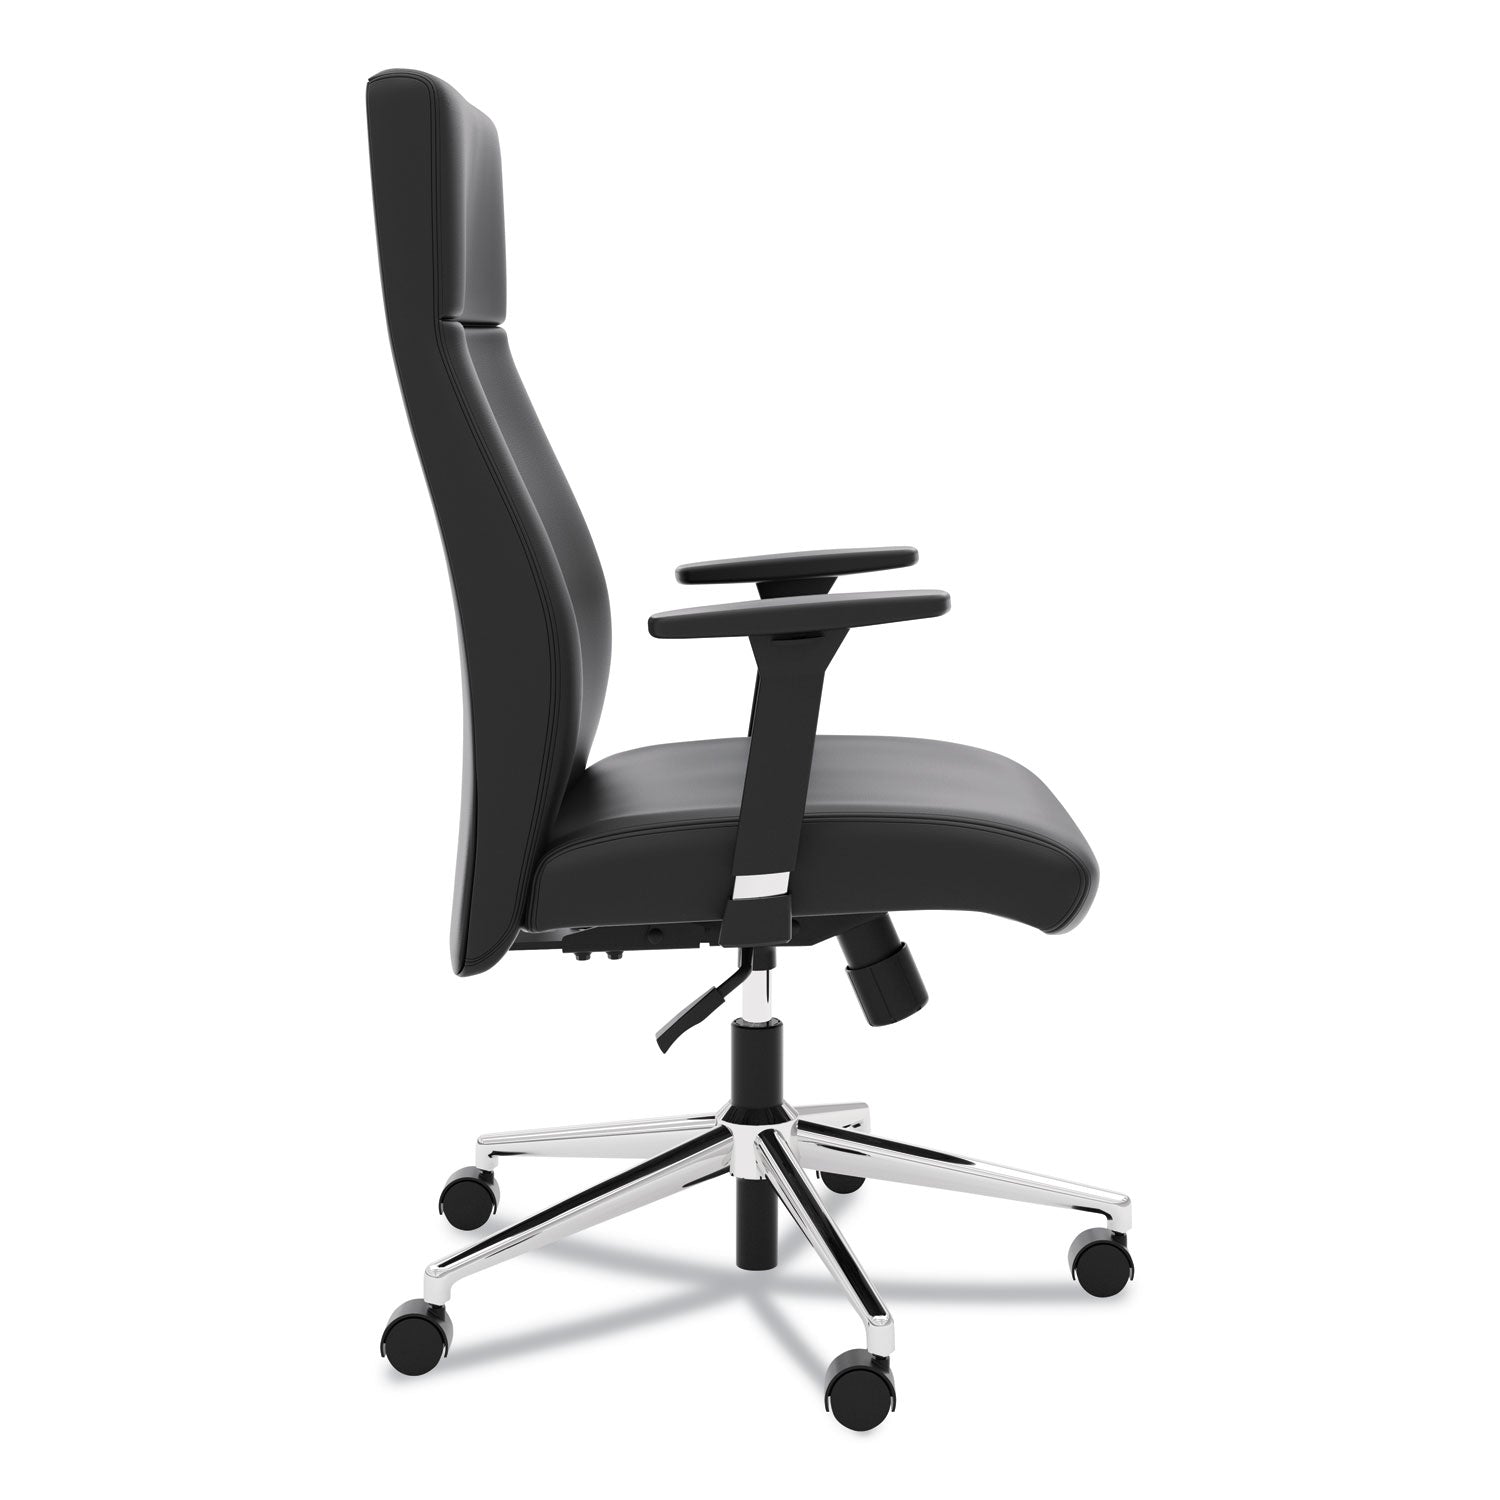 define-executive-high-back-leather-chair-supports-250-lb-17-to-21-seat-height-black-seat-back-polished-chrome-base_bsxvl108sb11 - 3